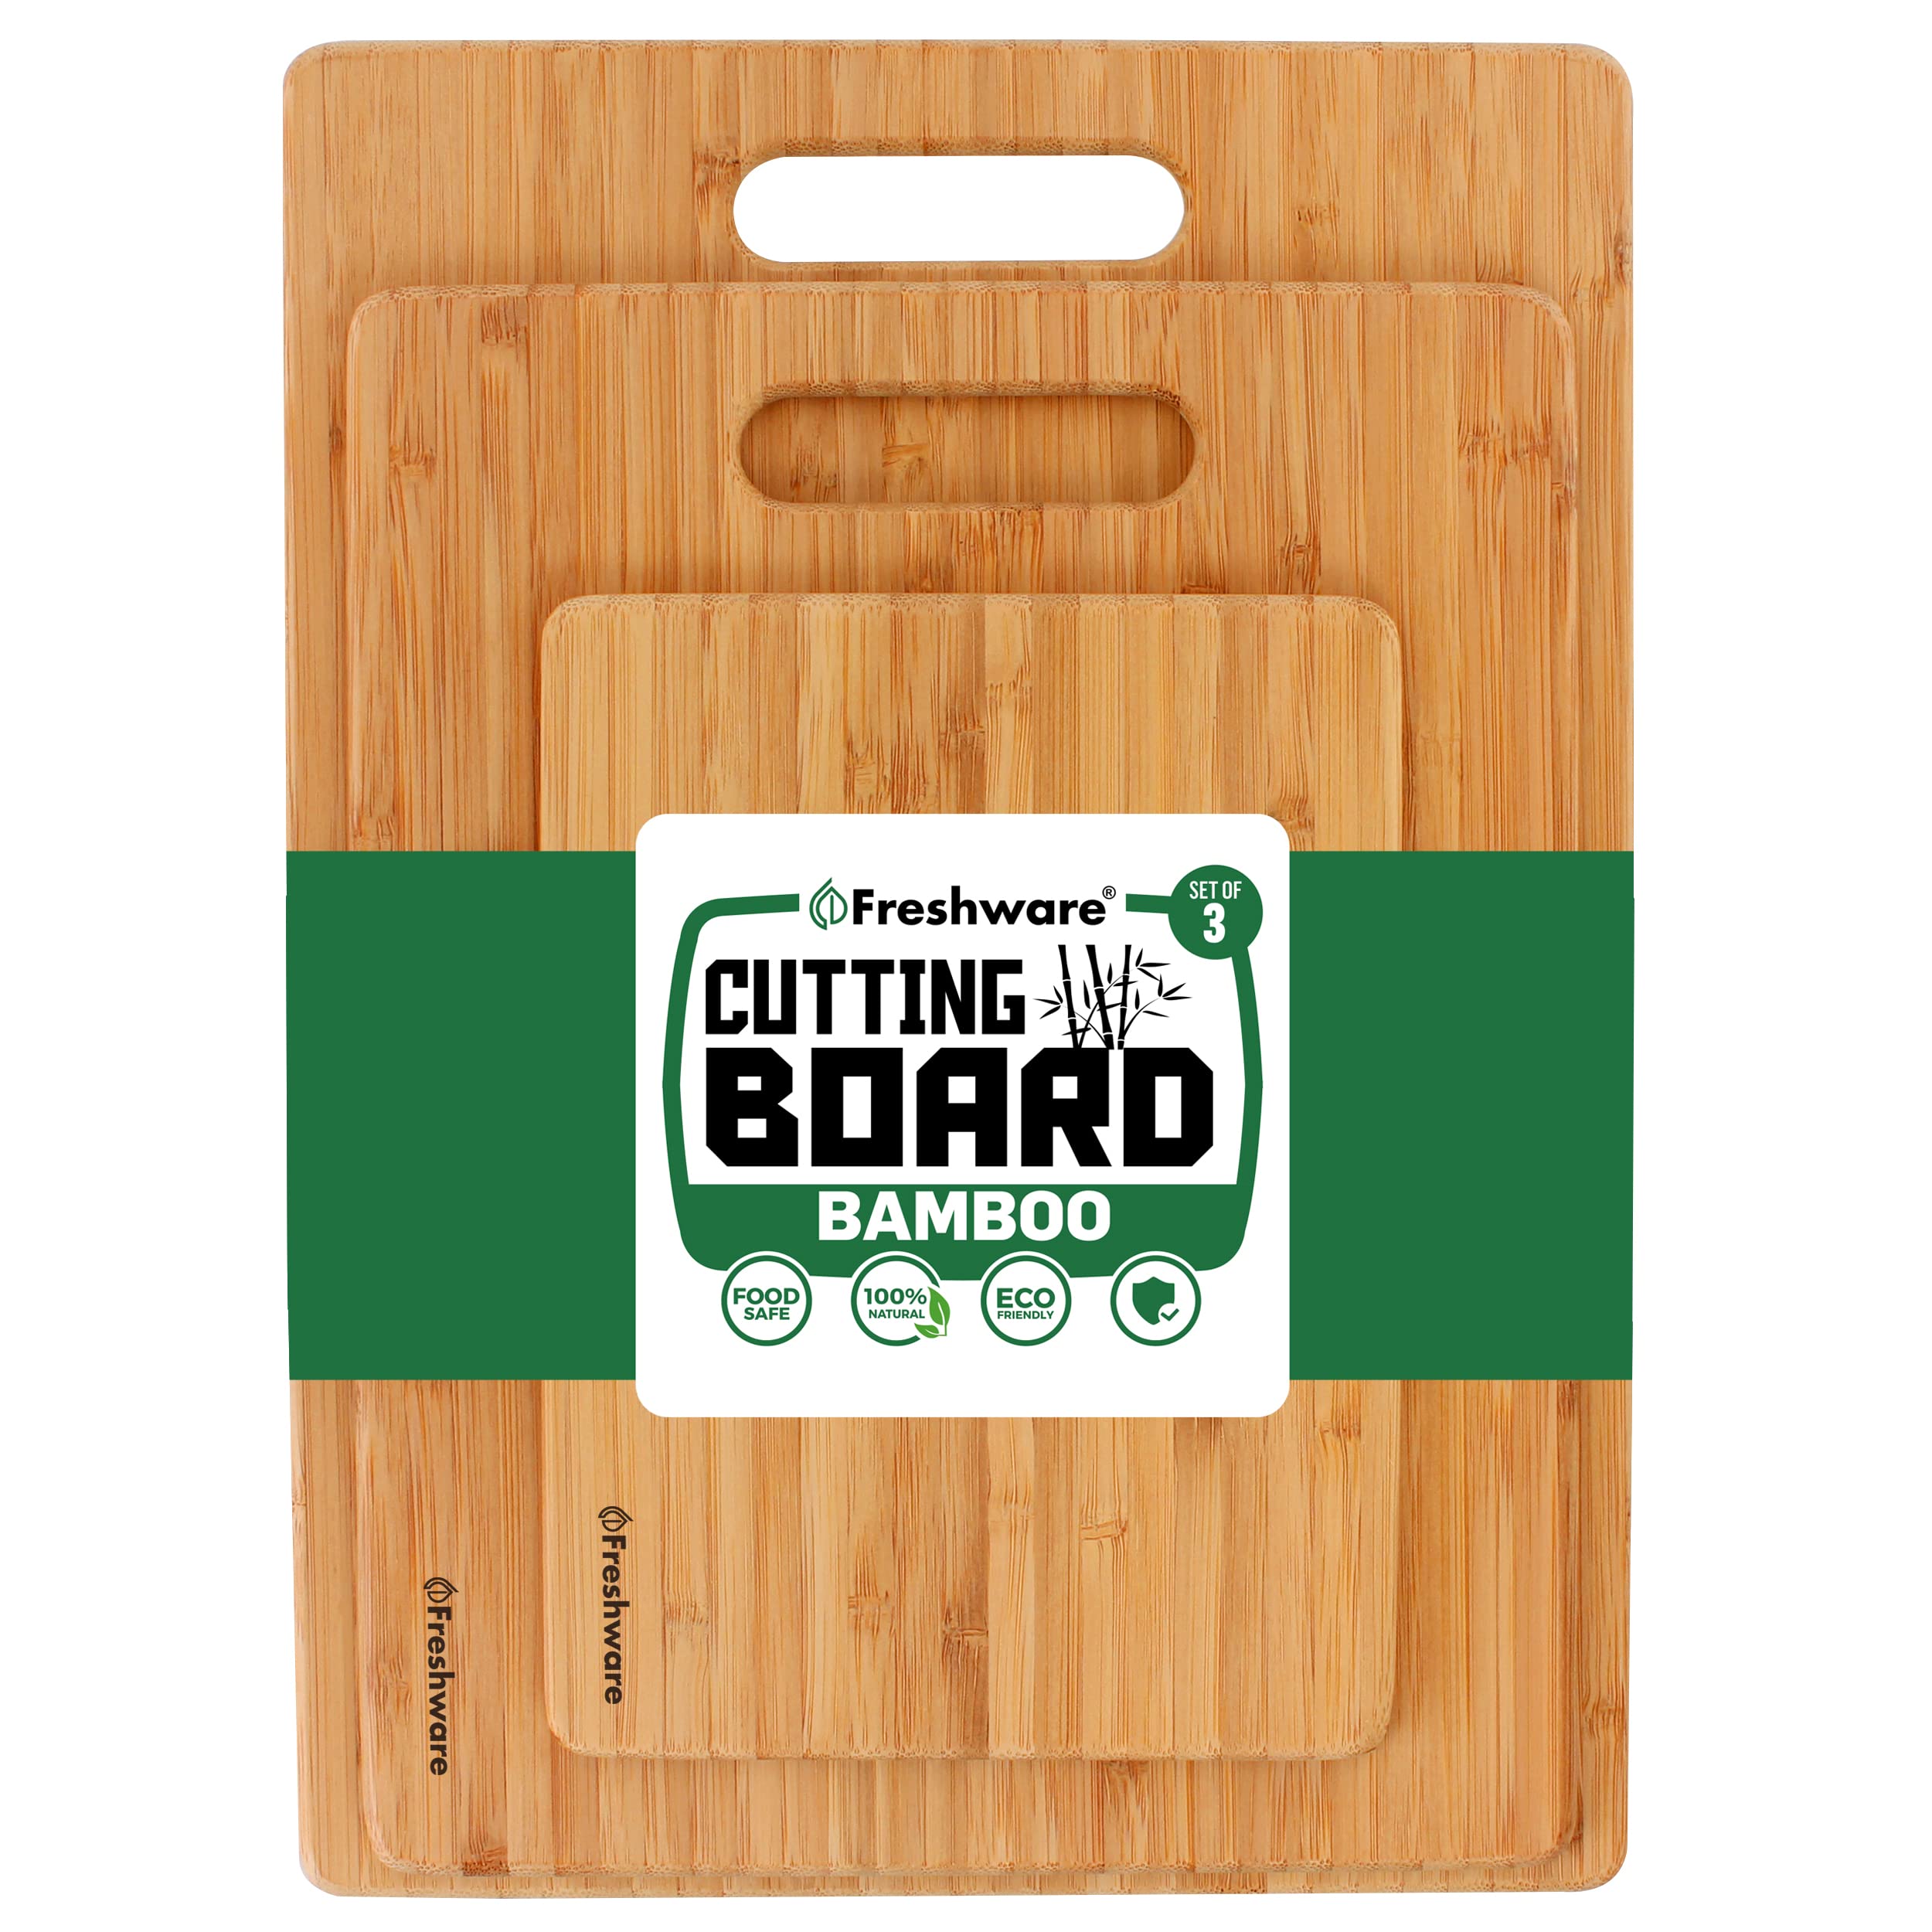 Freshware Bamboo Cutting Boards for Kitchen [Set of 3] Wood Cutting Board for Chopping Meat, Vegetables, Fruits, Cheese, Knife Friendly Se